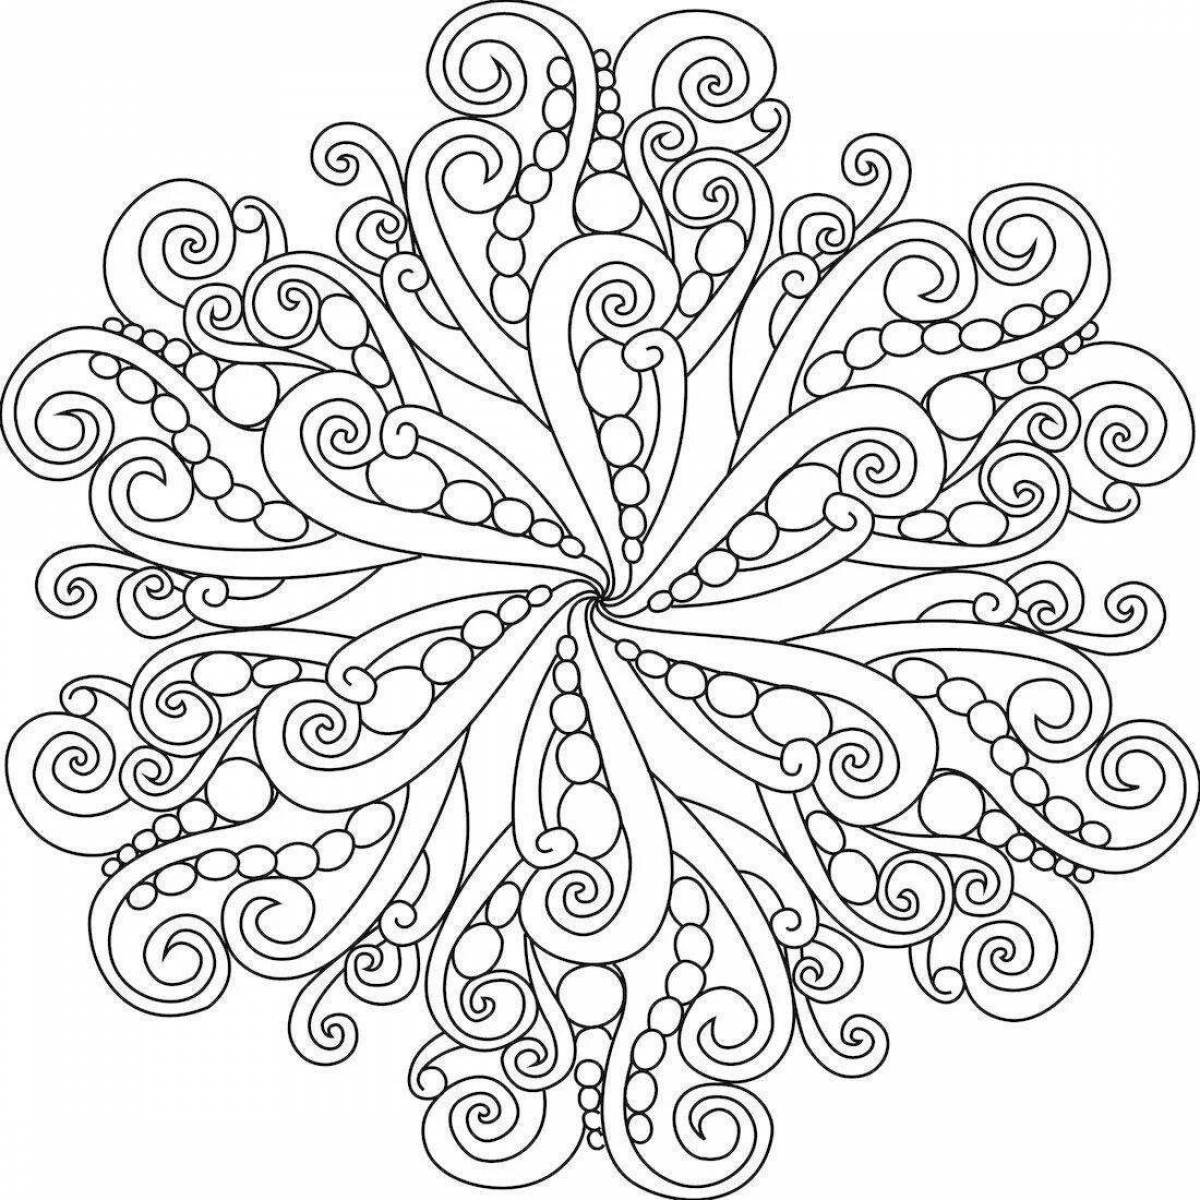 Color-fantastic coloring page for beginners